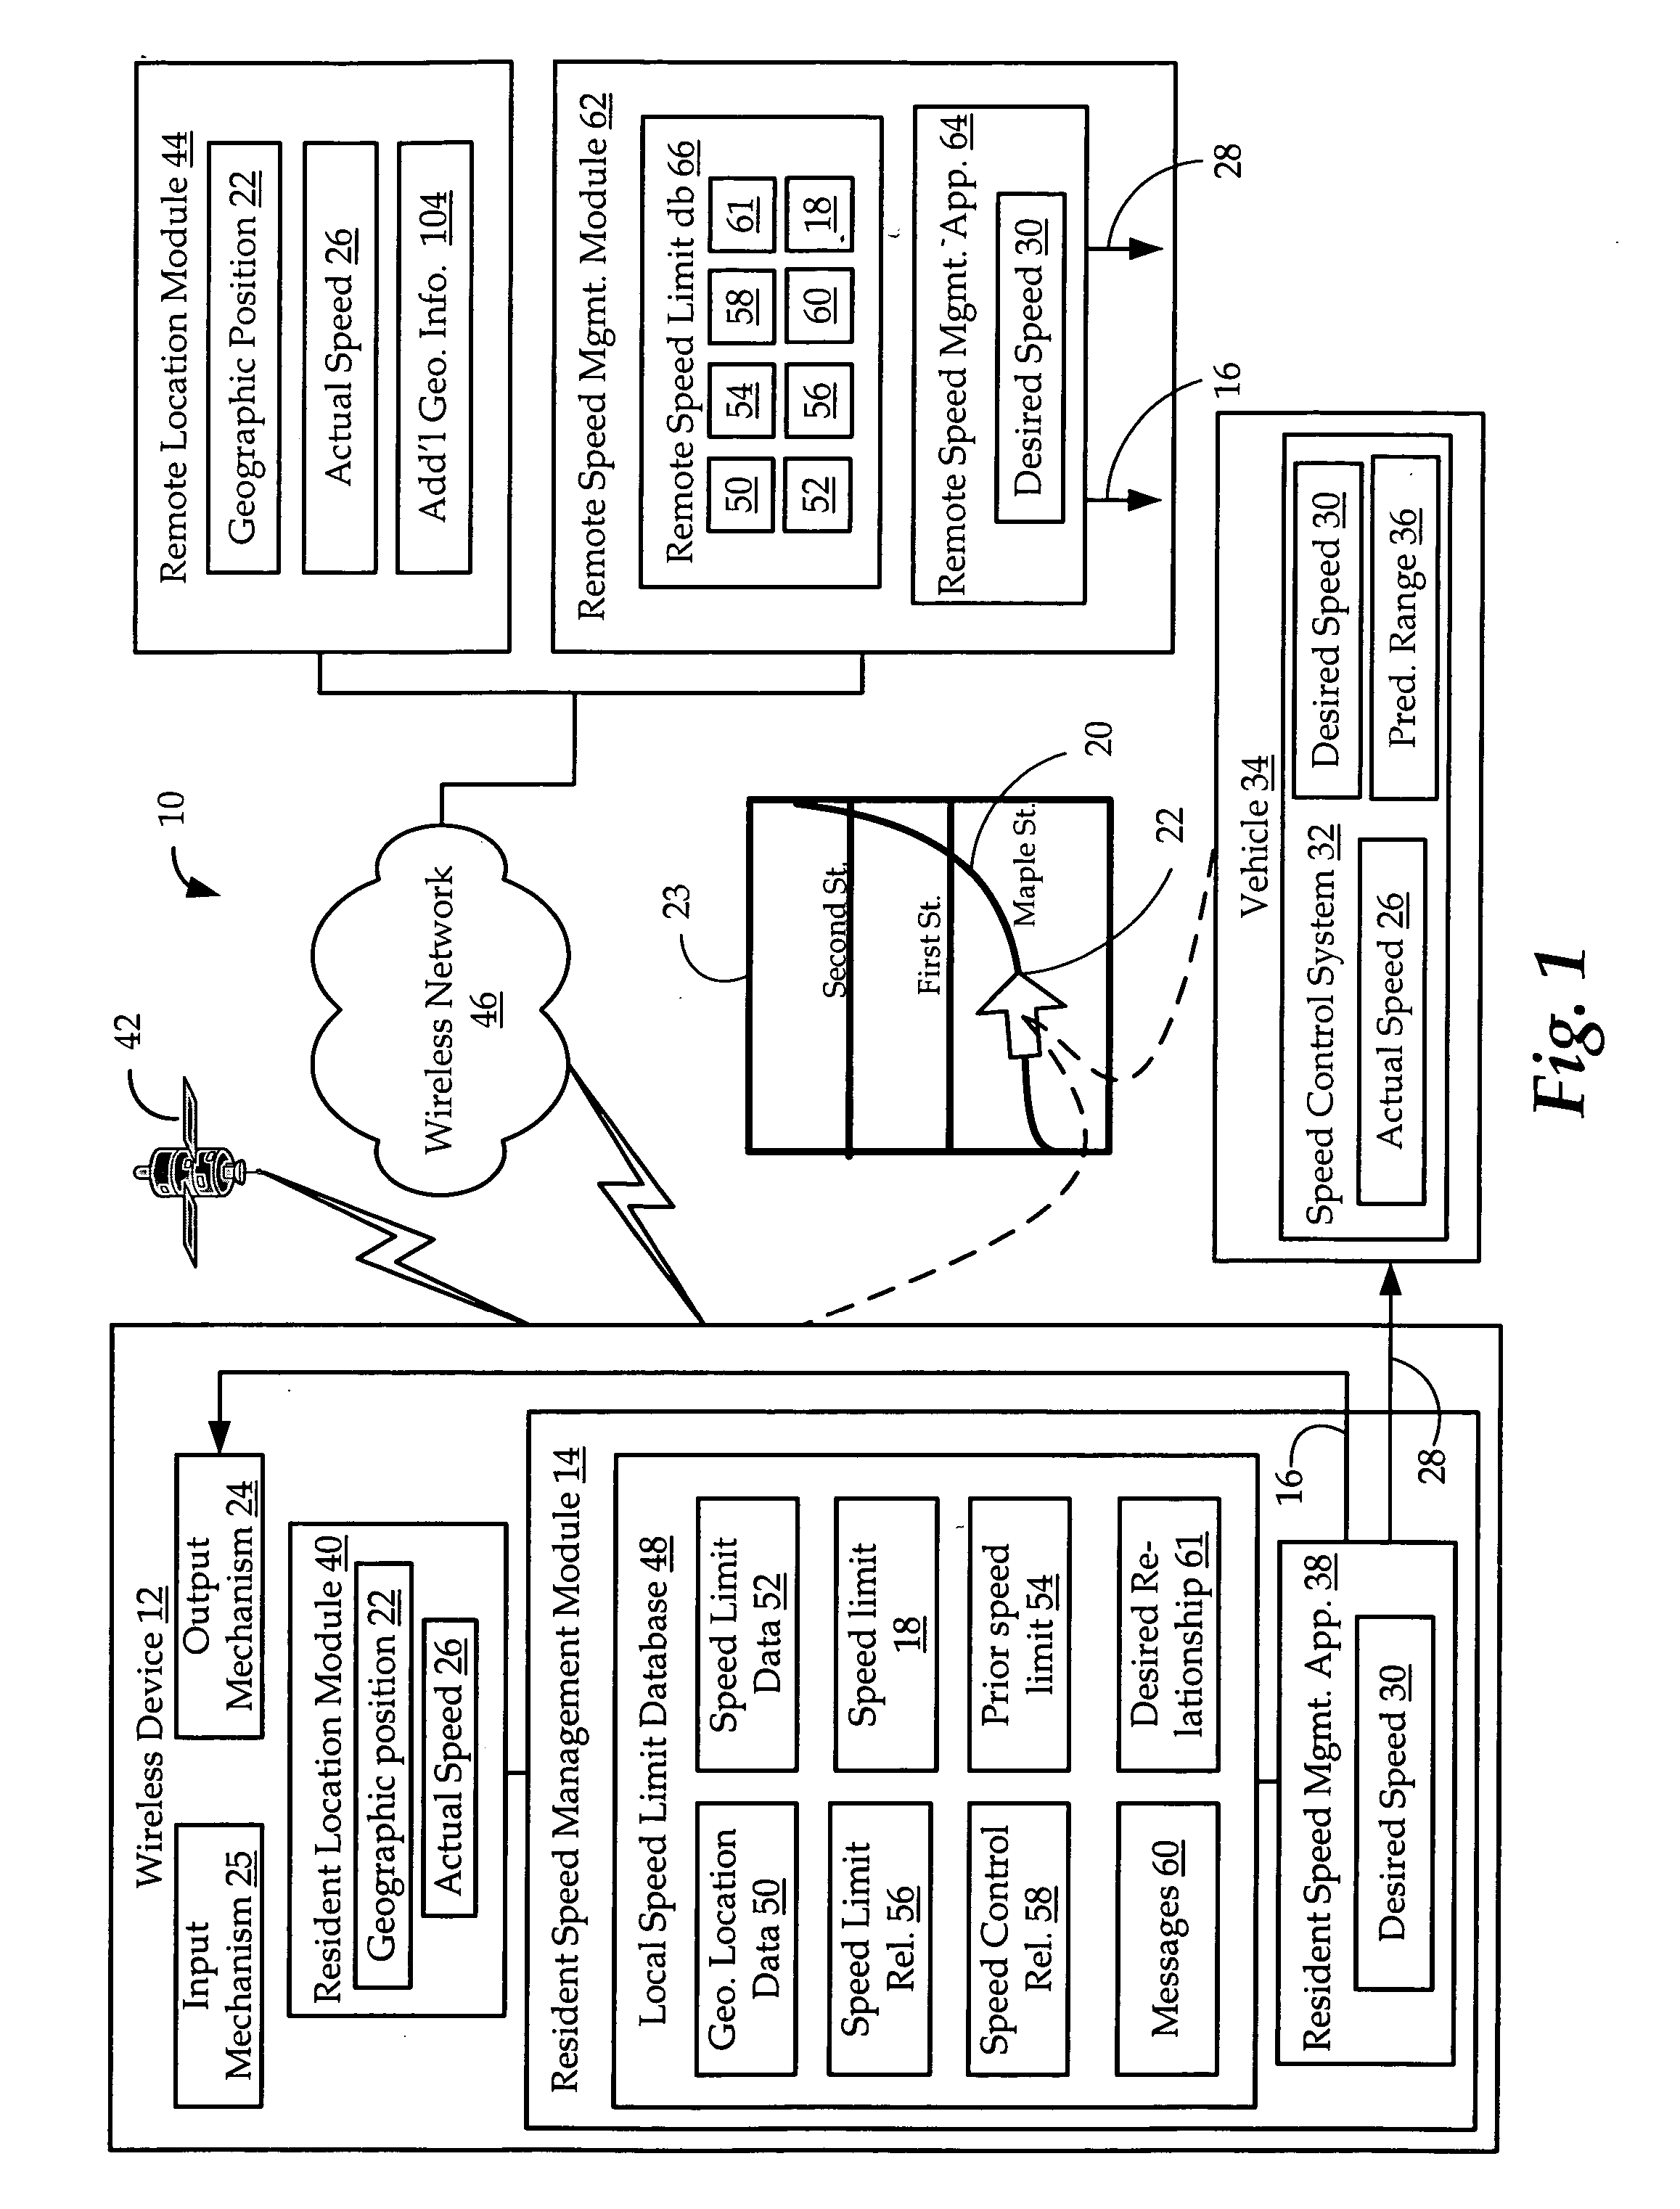 Apparatus and methods for speed management and control